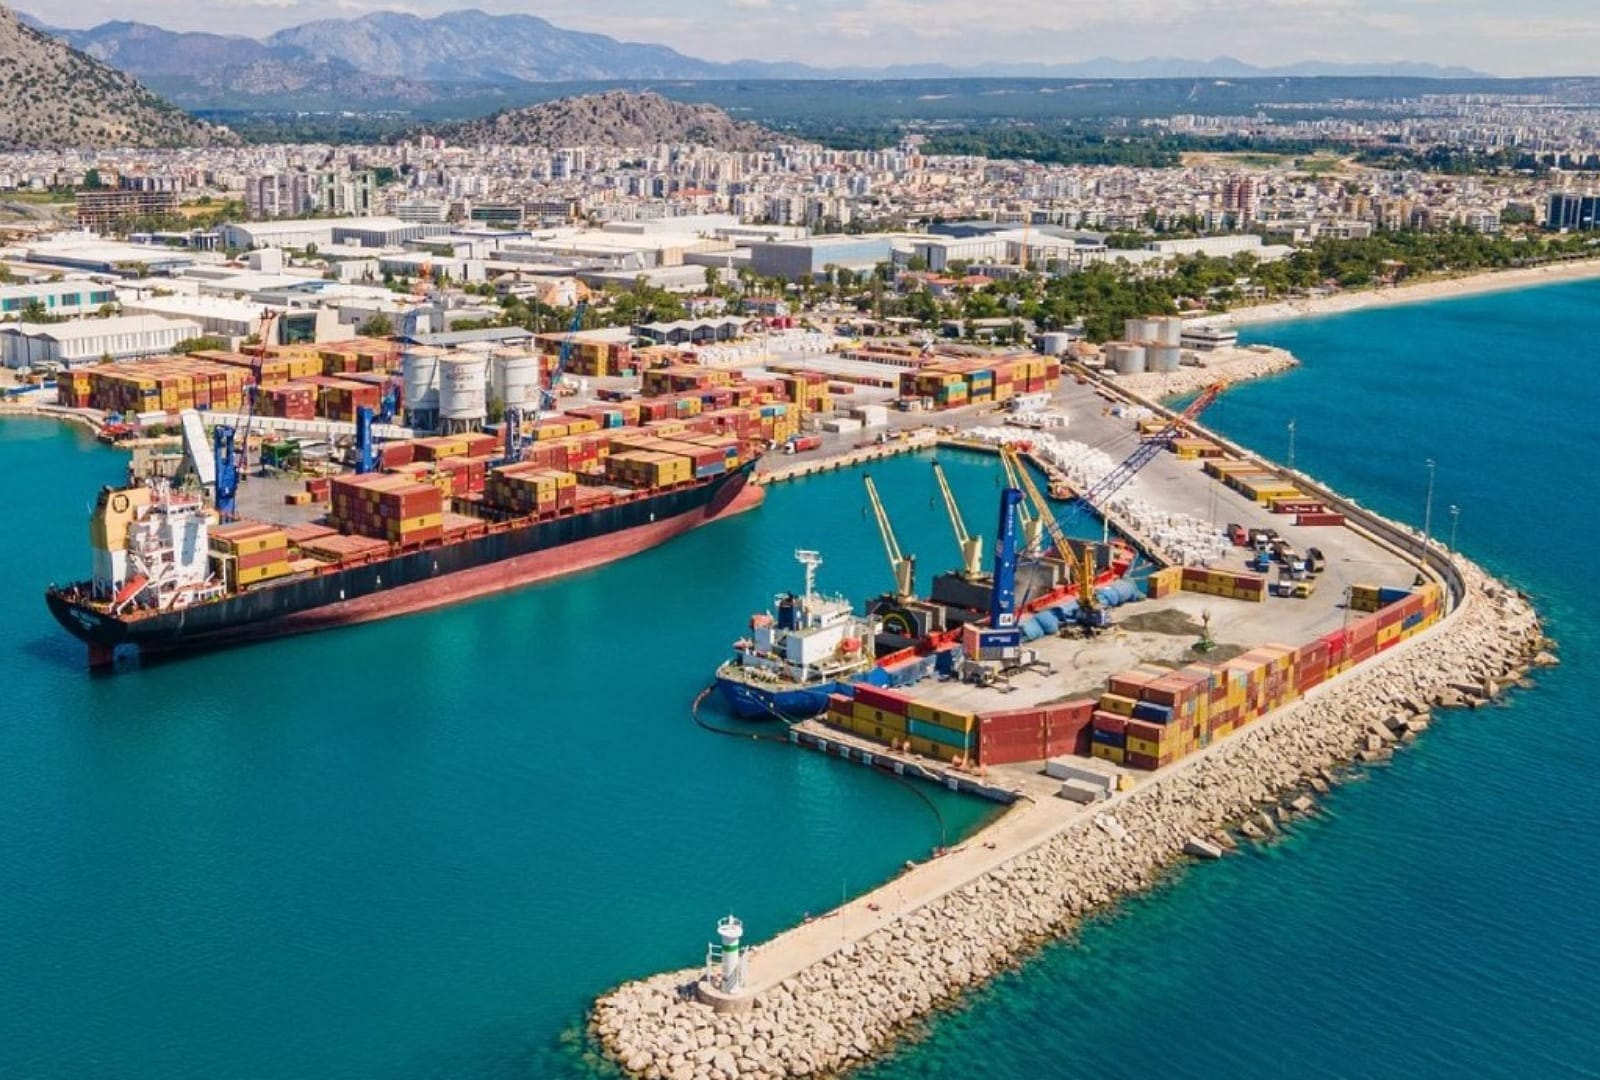 The largest port in Europe is now majority-owned by QTerminals